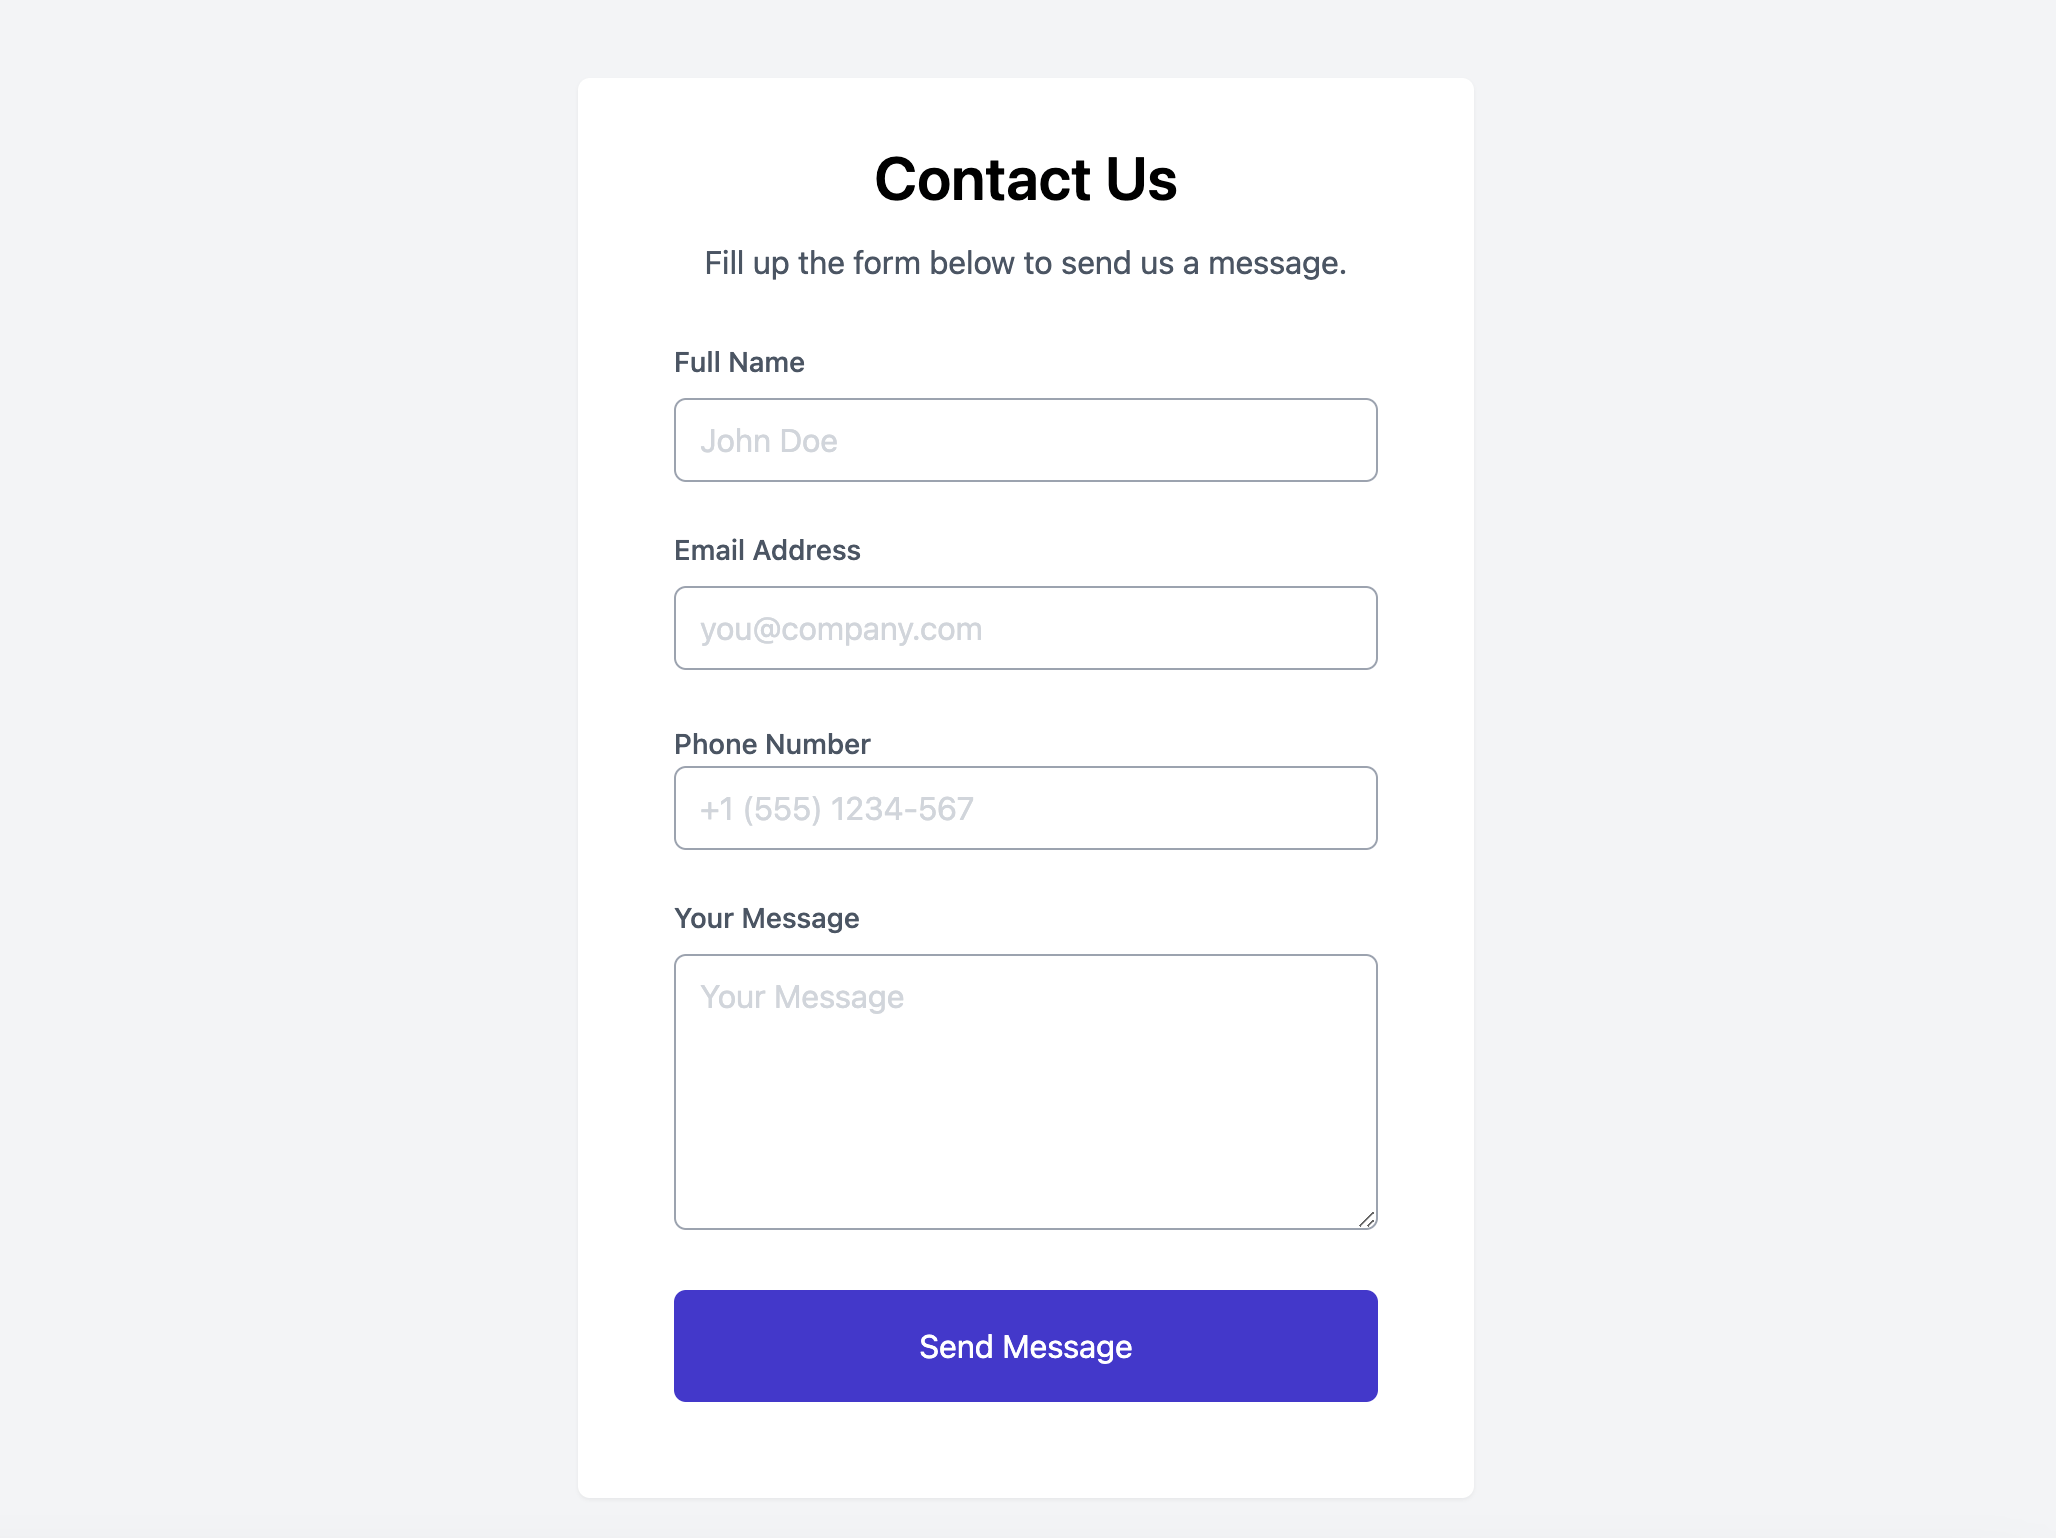   Basic HTML Contact Form